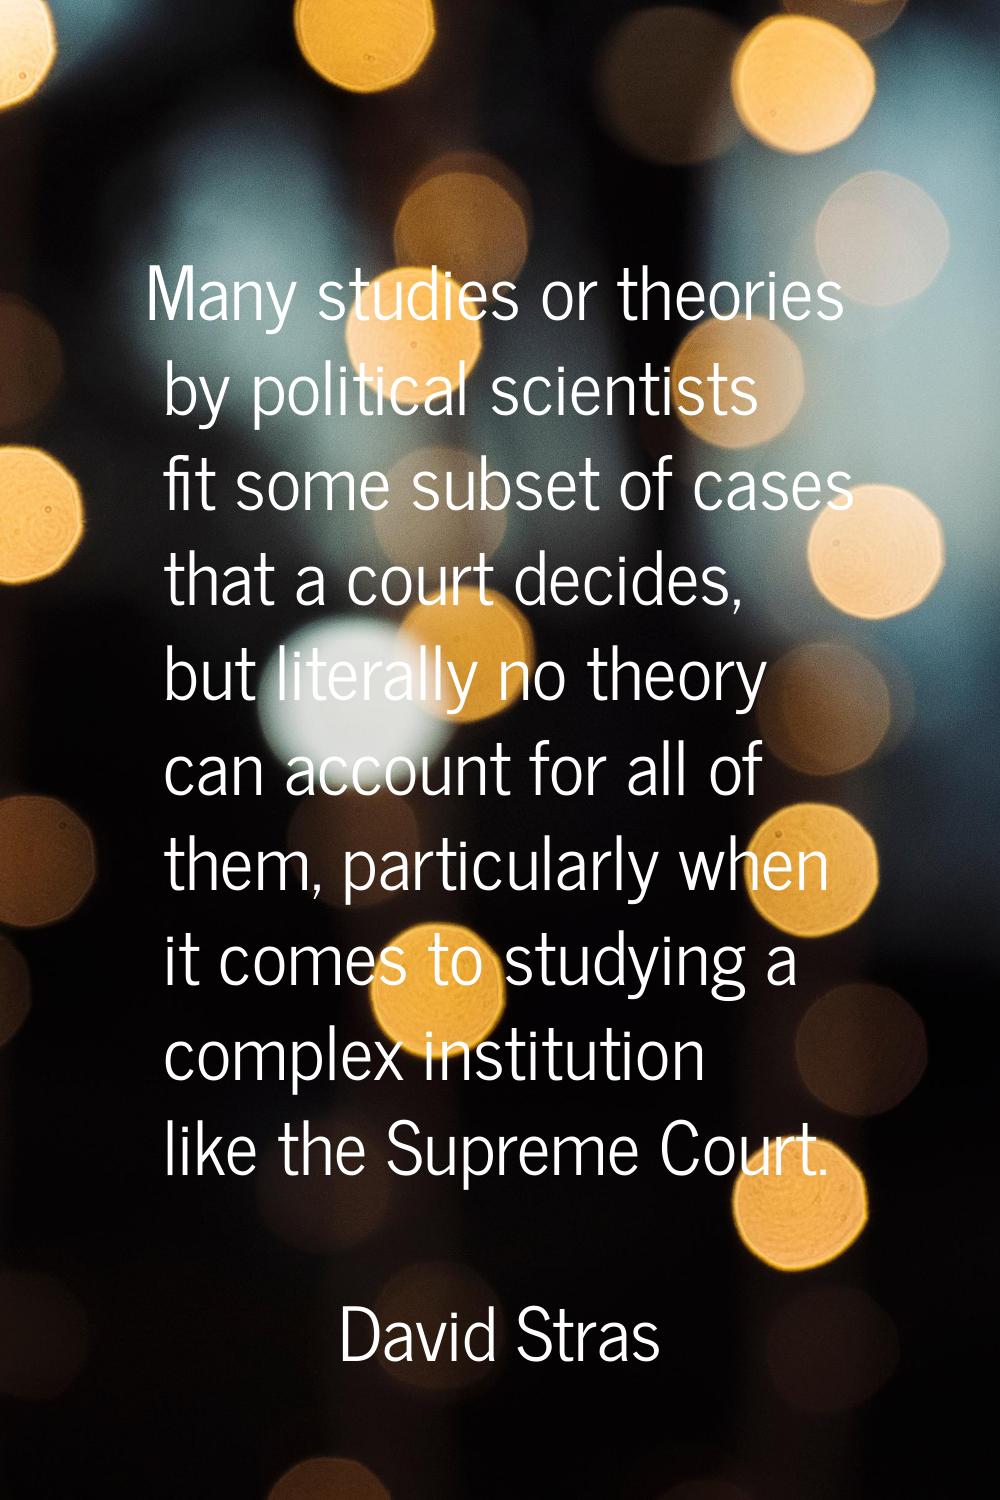 Many studies or theories by political scientists fit some subset of cases that a court decides, but